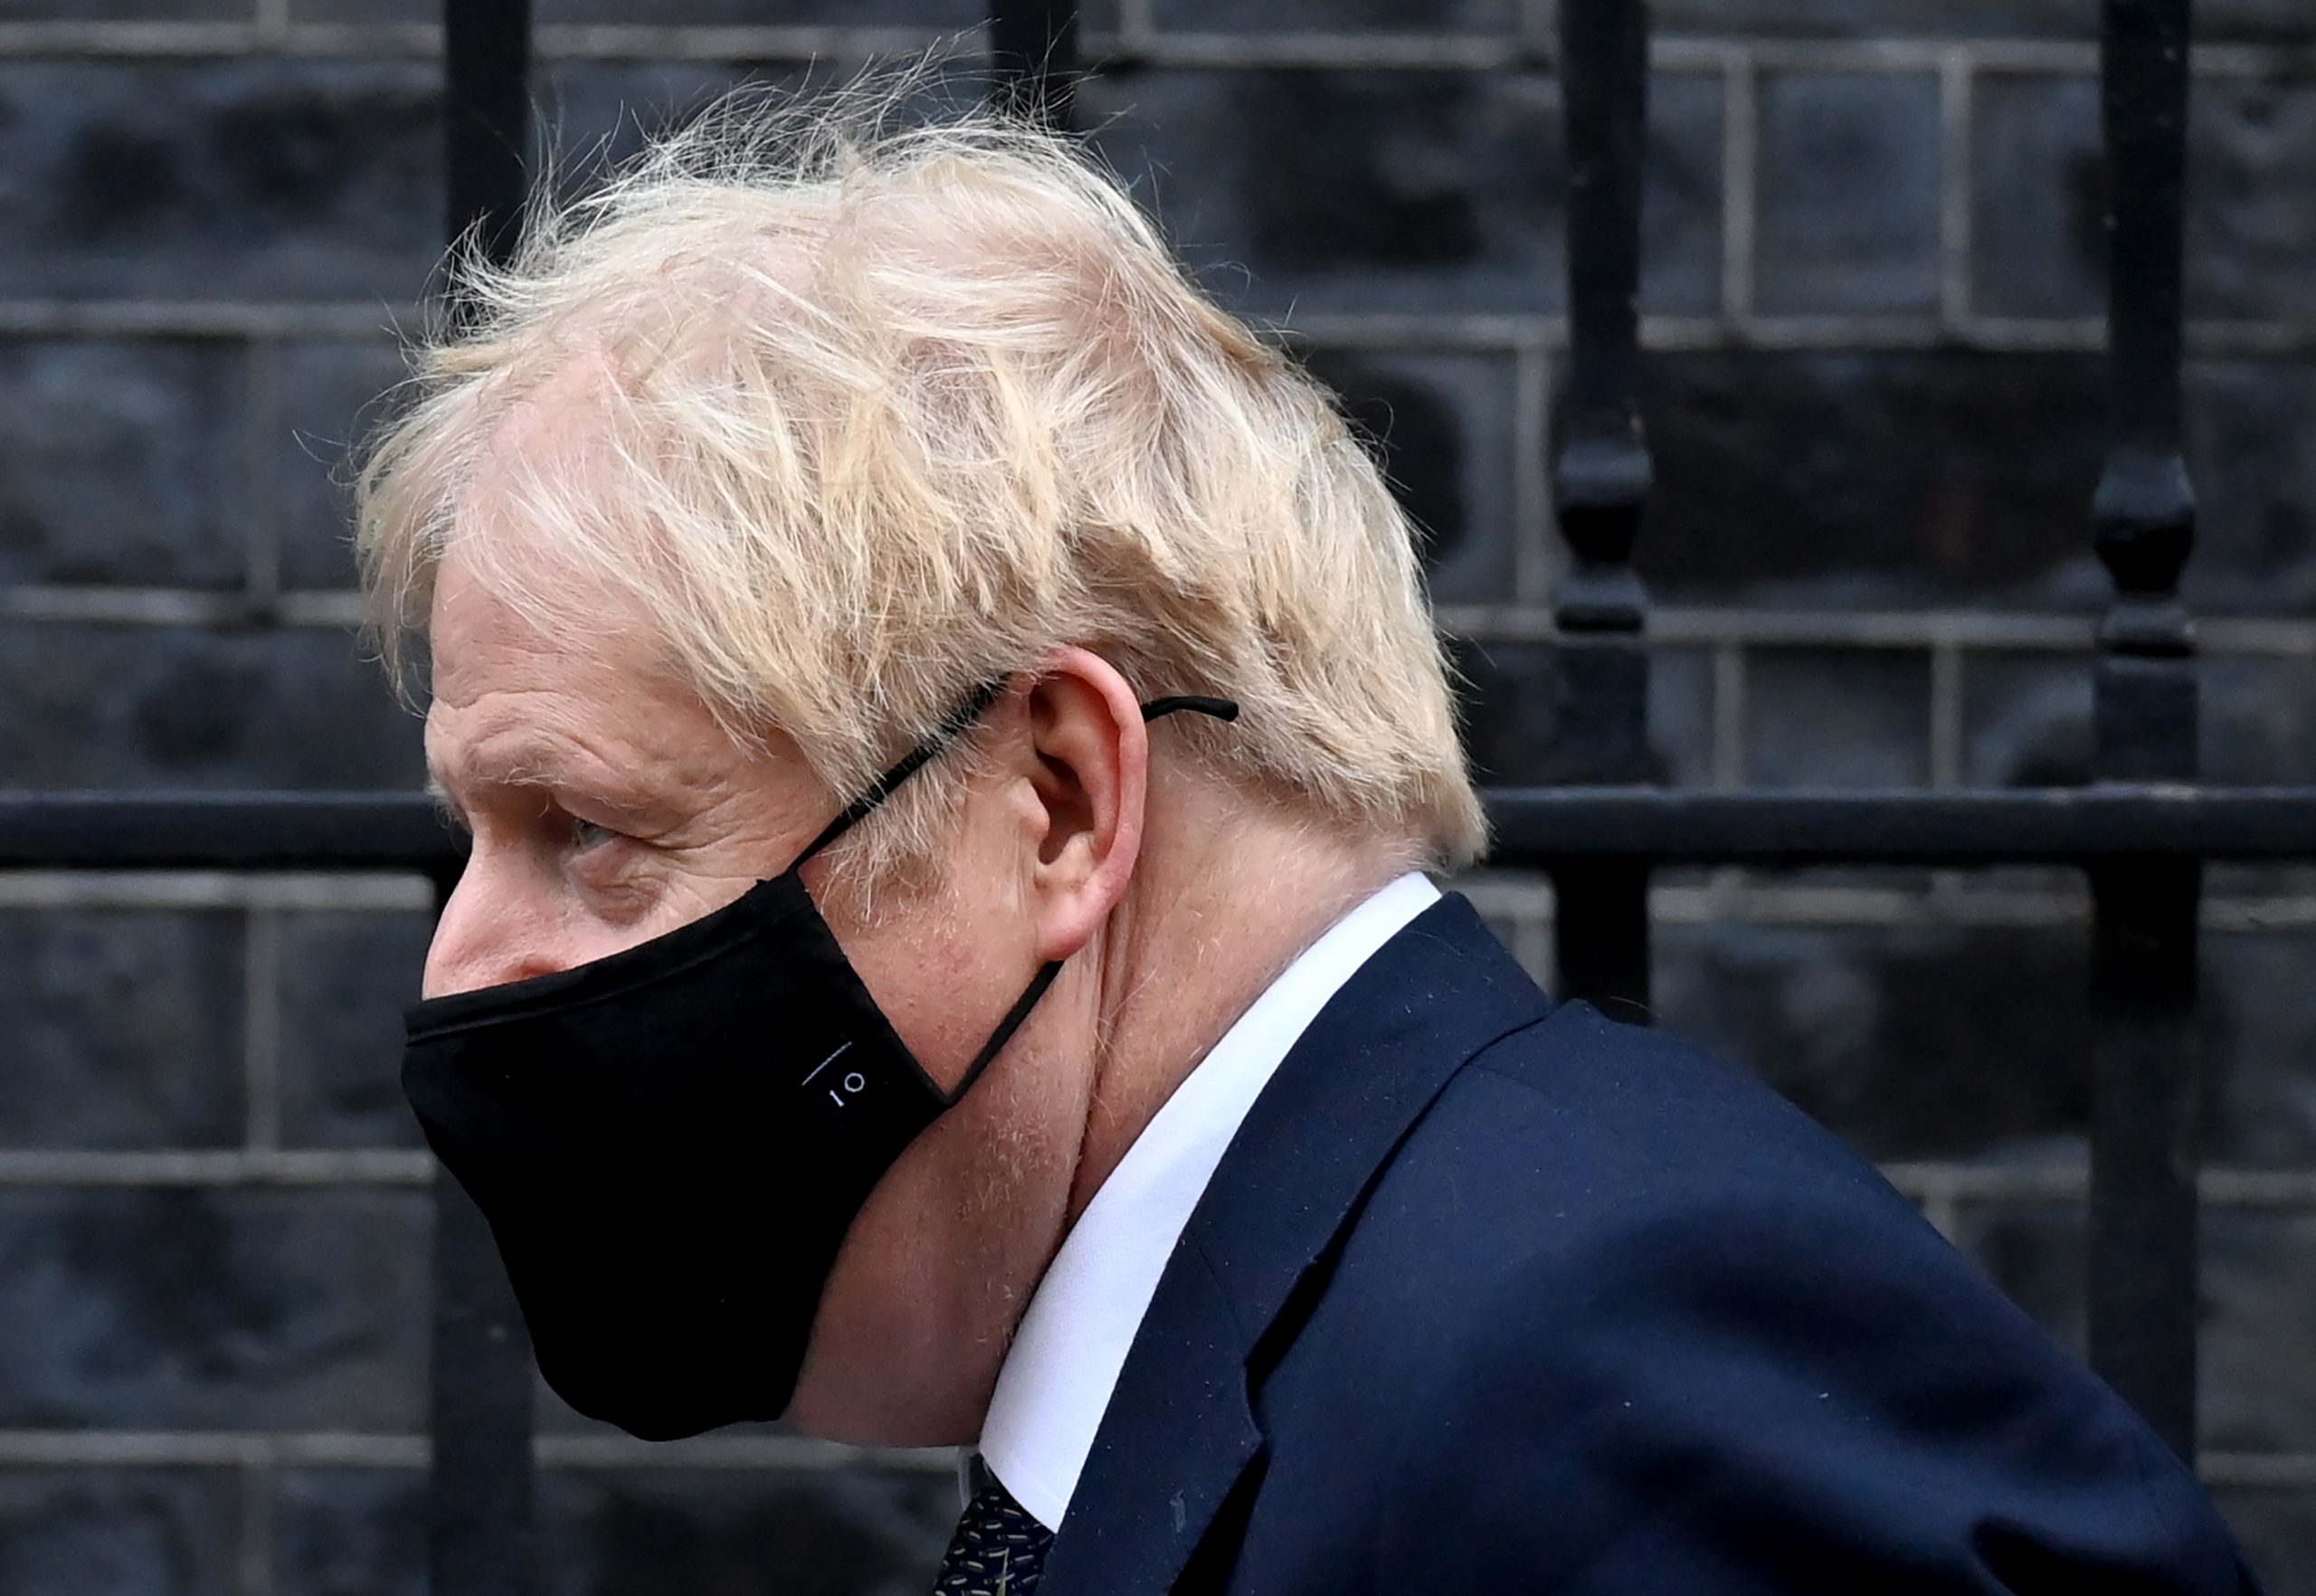 epa08798069 British Prime Minister Boris Johnson wearing a face mask leaves no10 Downing Street to attend Prime Minister Questions in the Houses of Parliament in London, Britain, 04 November 2020. A second national lockdown is set to come into force in England from 05 November and is supposed to end on 02 December 2020.  EPA/FACUNDO ARRIZABALAGA